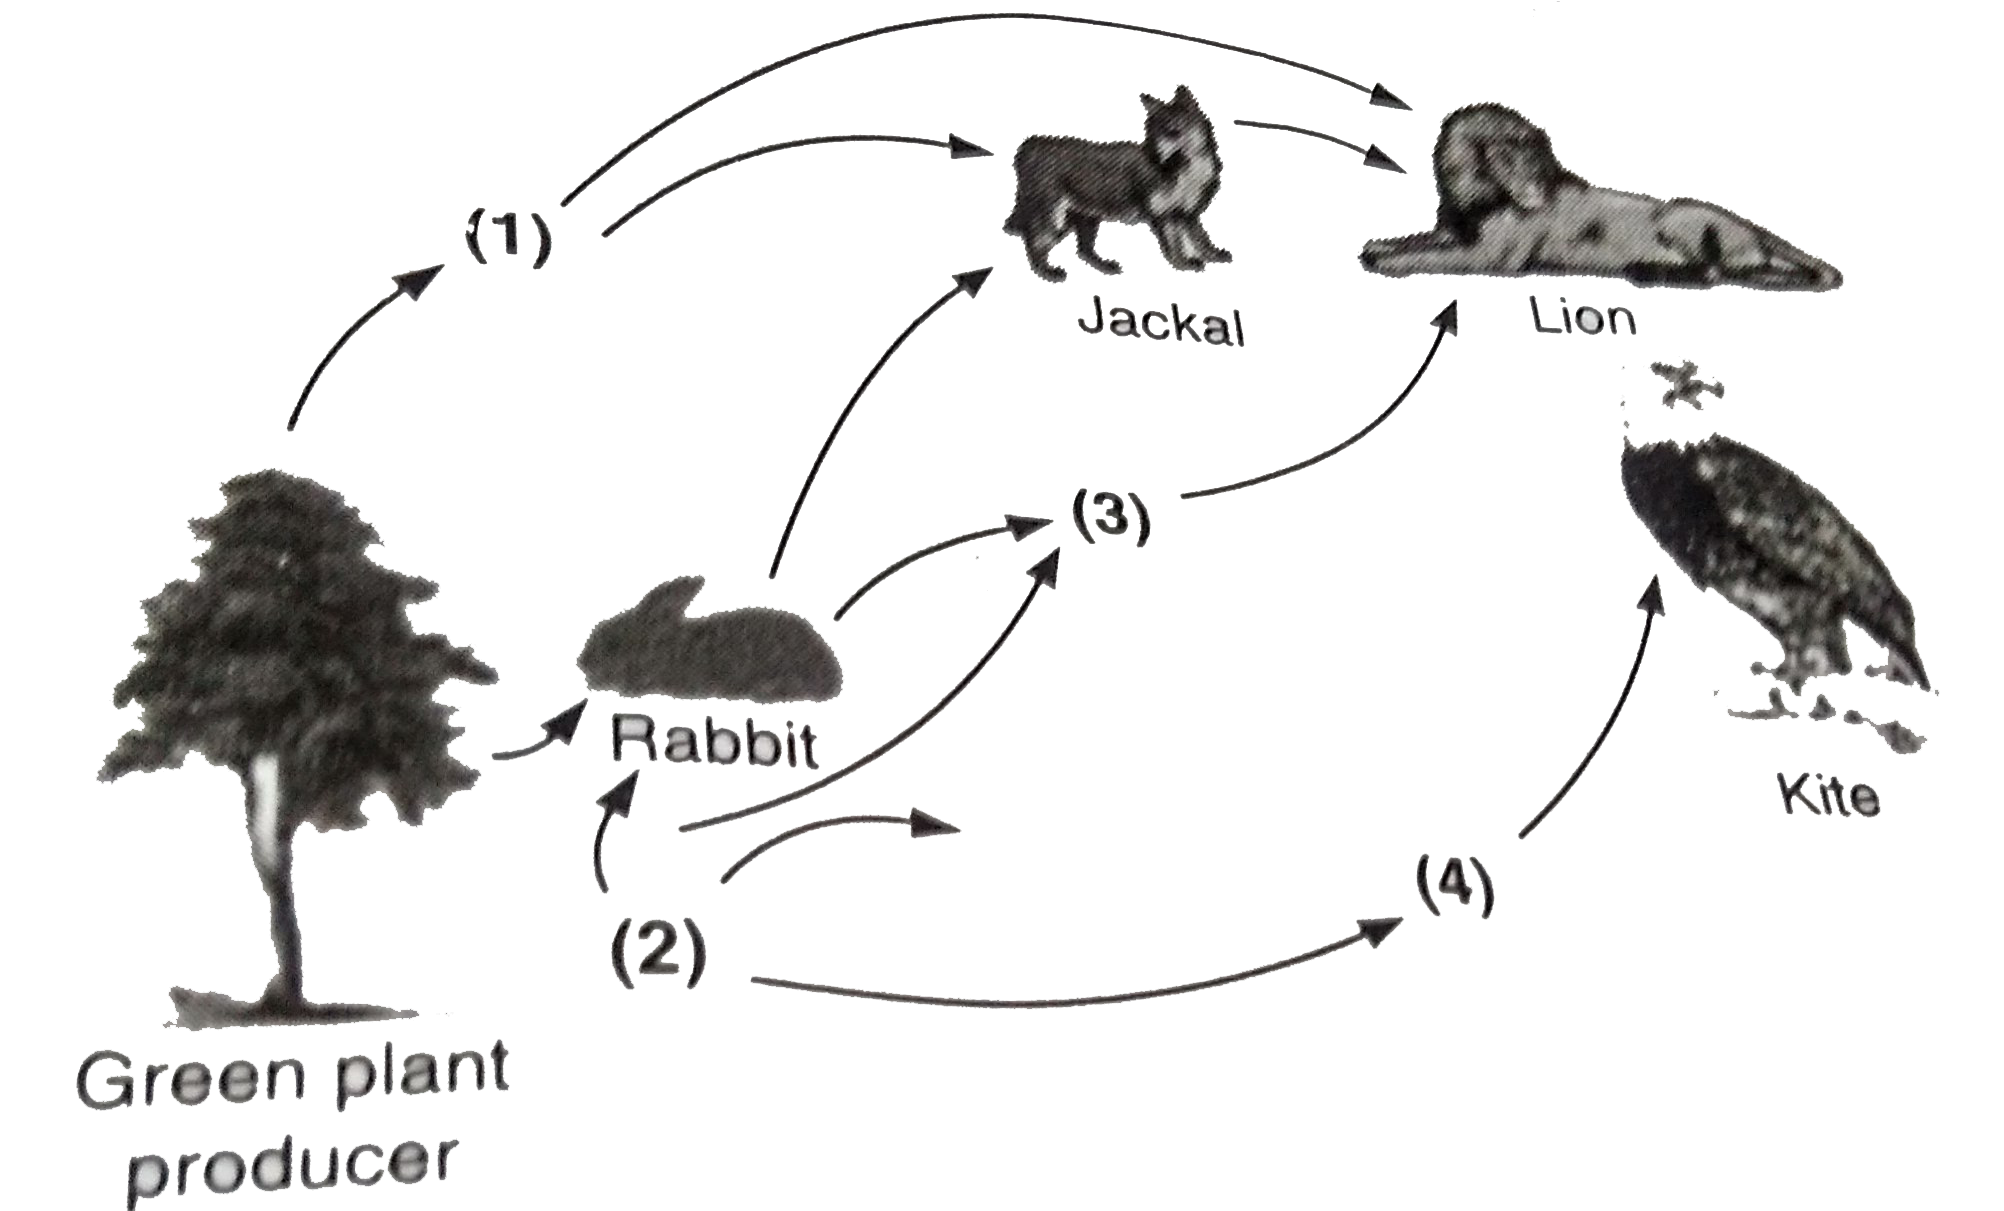 Identify the likely organisms (1), (2), (3) and  (4) in the food web shown below: